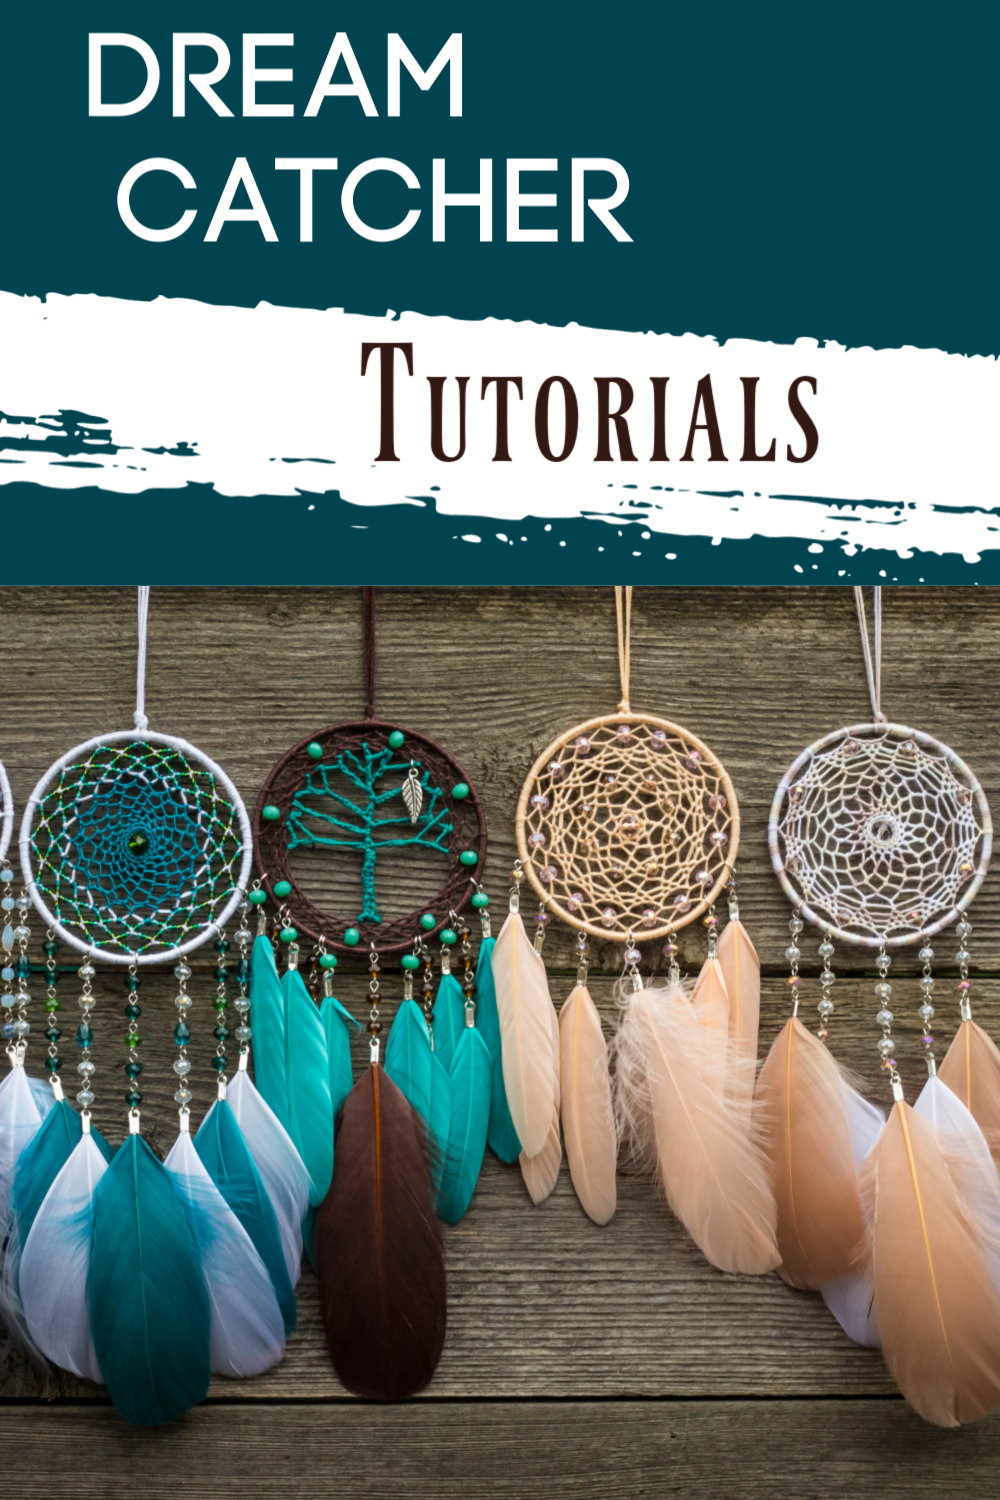 Dream Catcher step by step directions - Dream Catcher step by step directions -   19 diy Dream Catcher step by step ideas